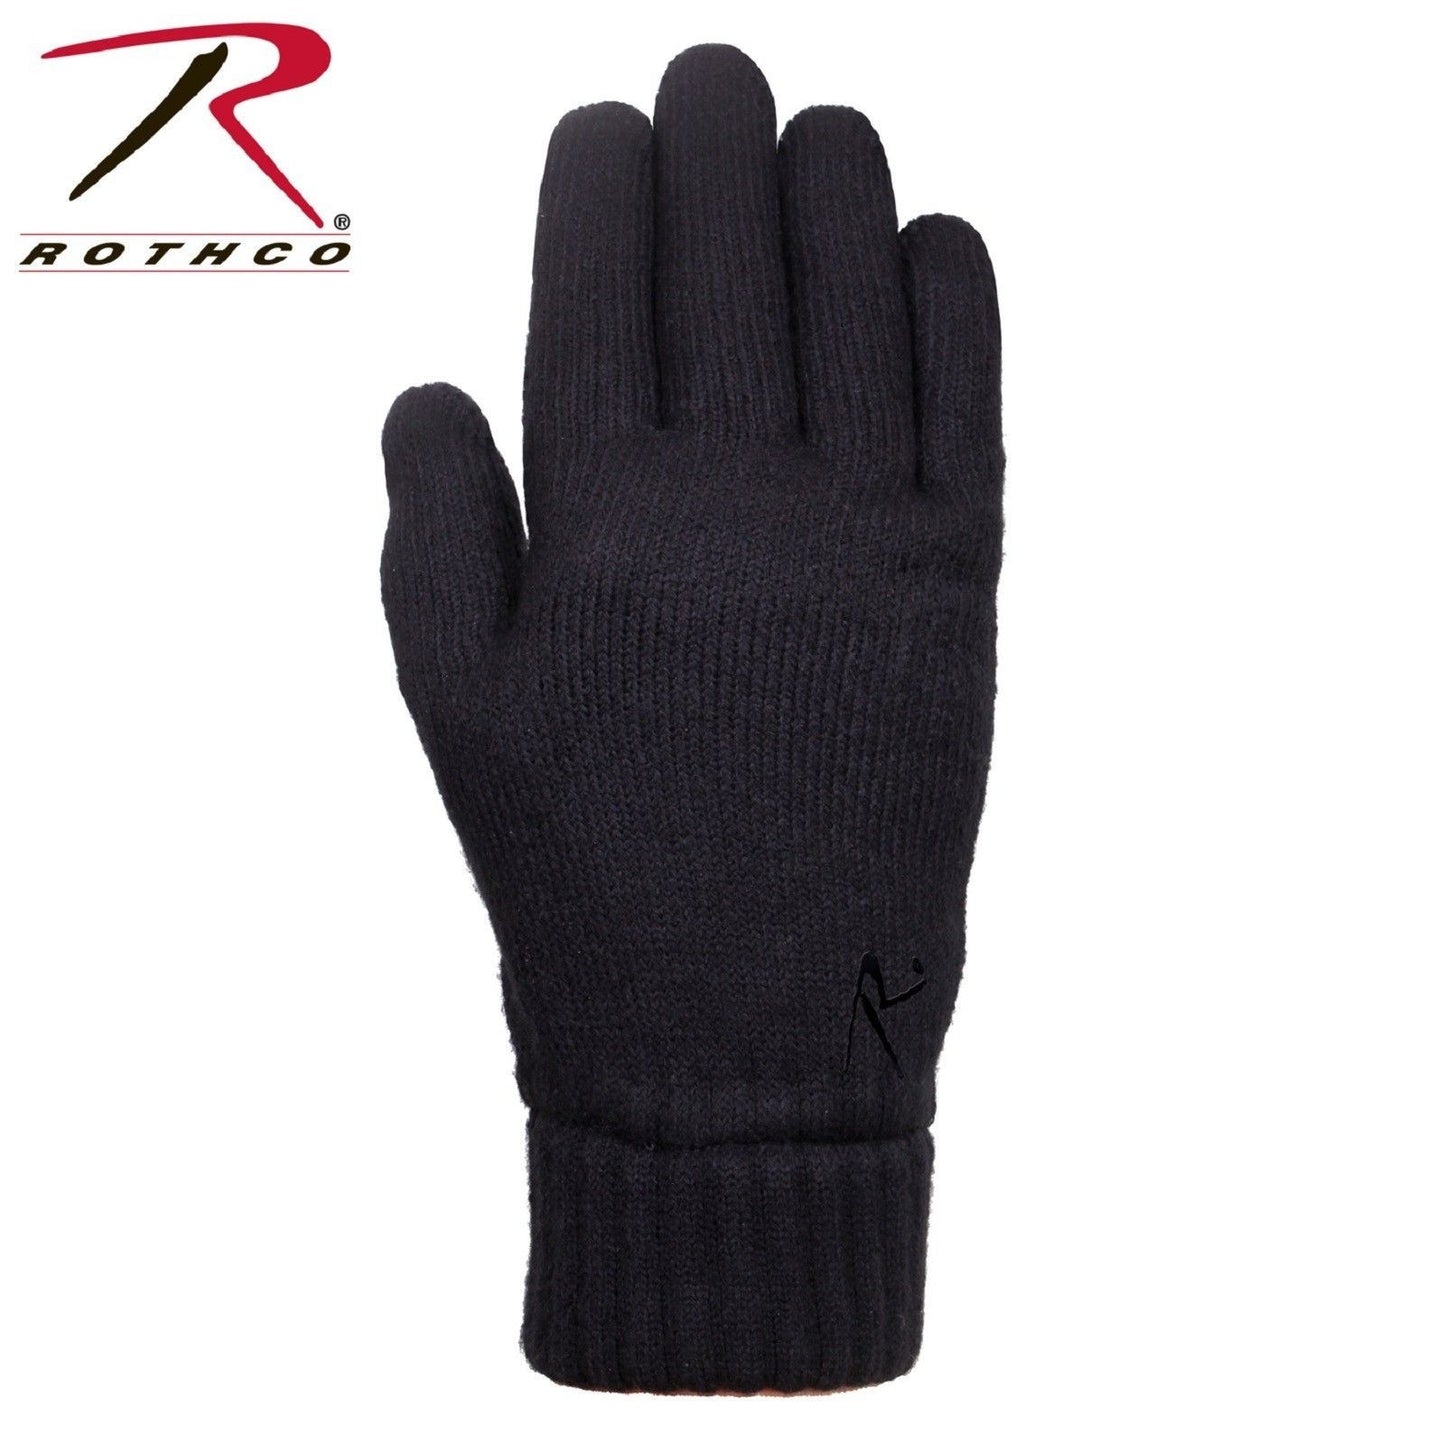 Black Warm Fleece Lined Gloves - Rothco Cold Weather Winter Gloves